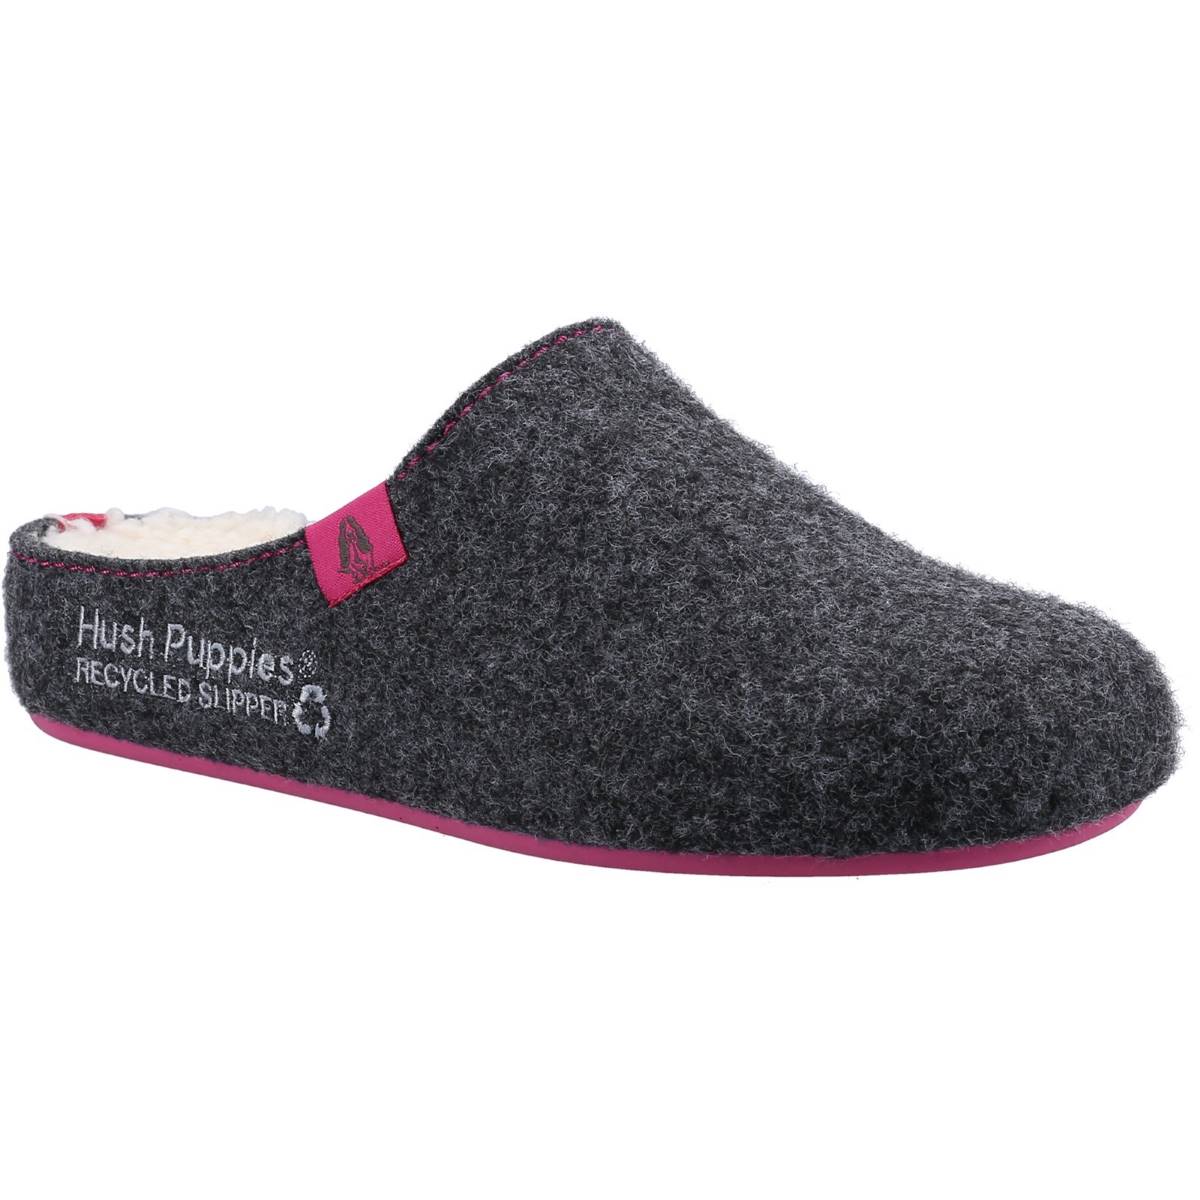 Hush Puppies The Good Slipper Charcoal Womens slippers HPW1000-189-4 in a Plain Textile in Size 6